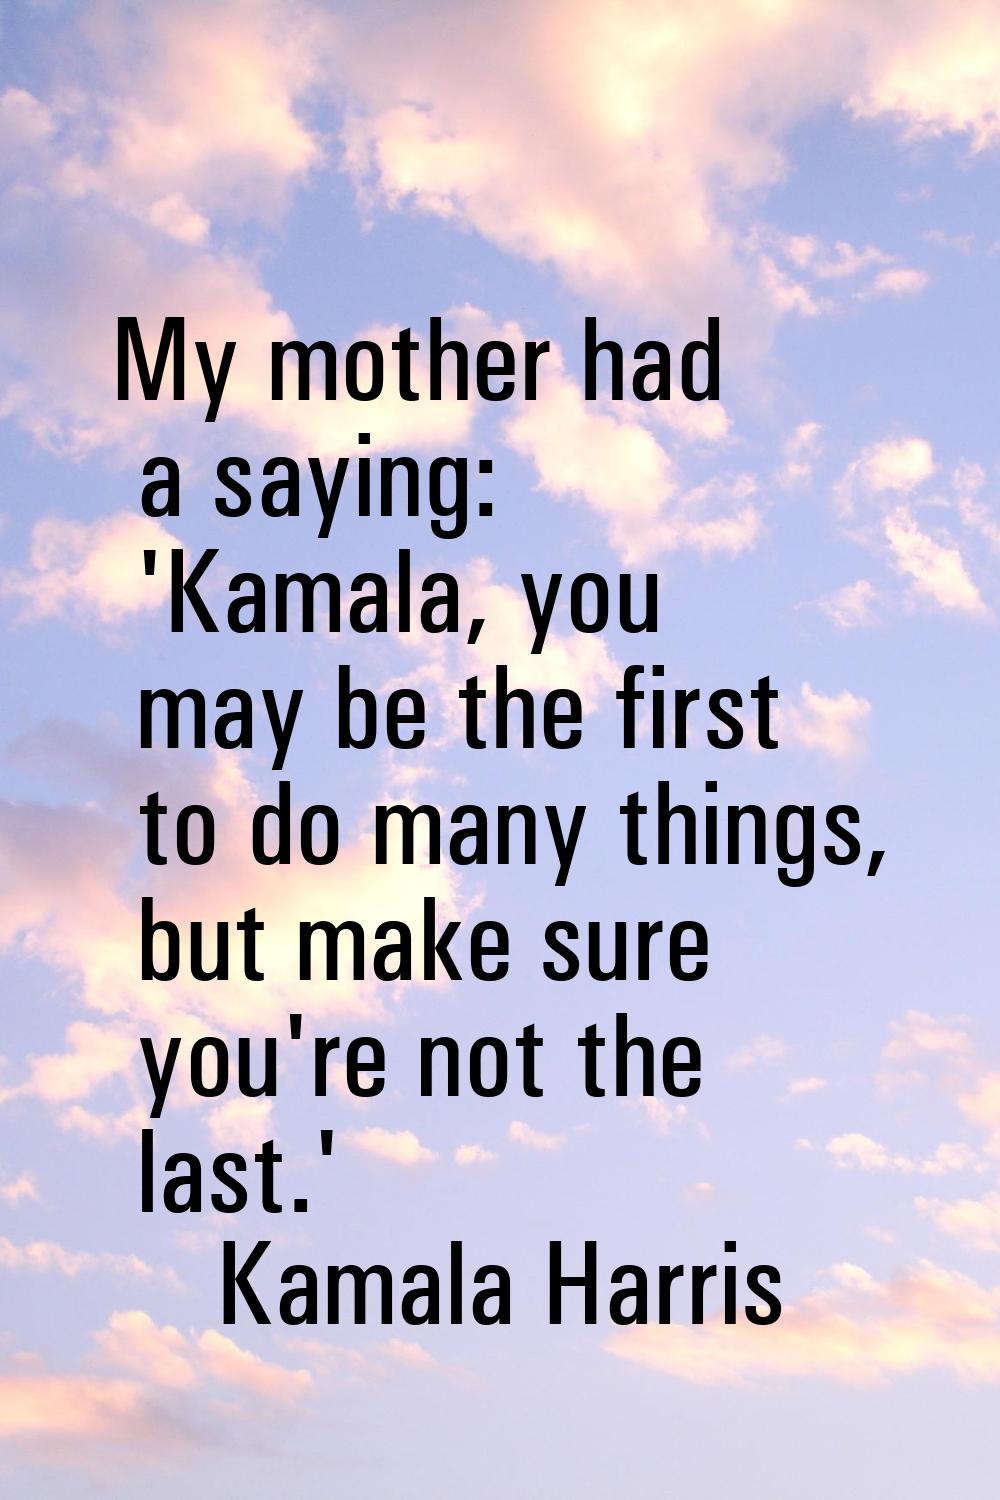 My mother had a saying: 'Kamala, you may be the first to do many things, but make sure you're not t